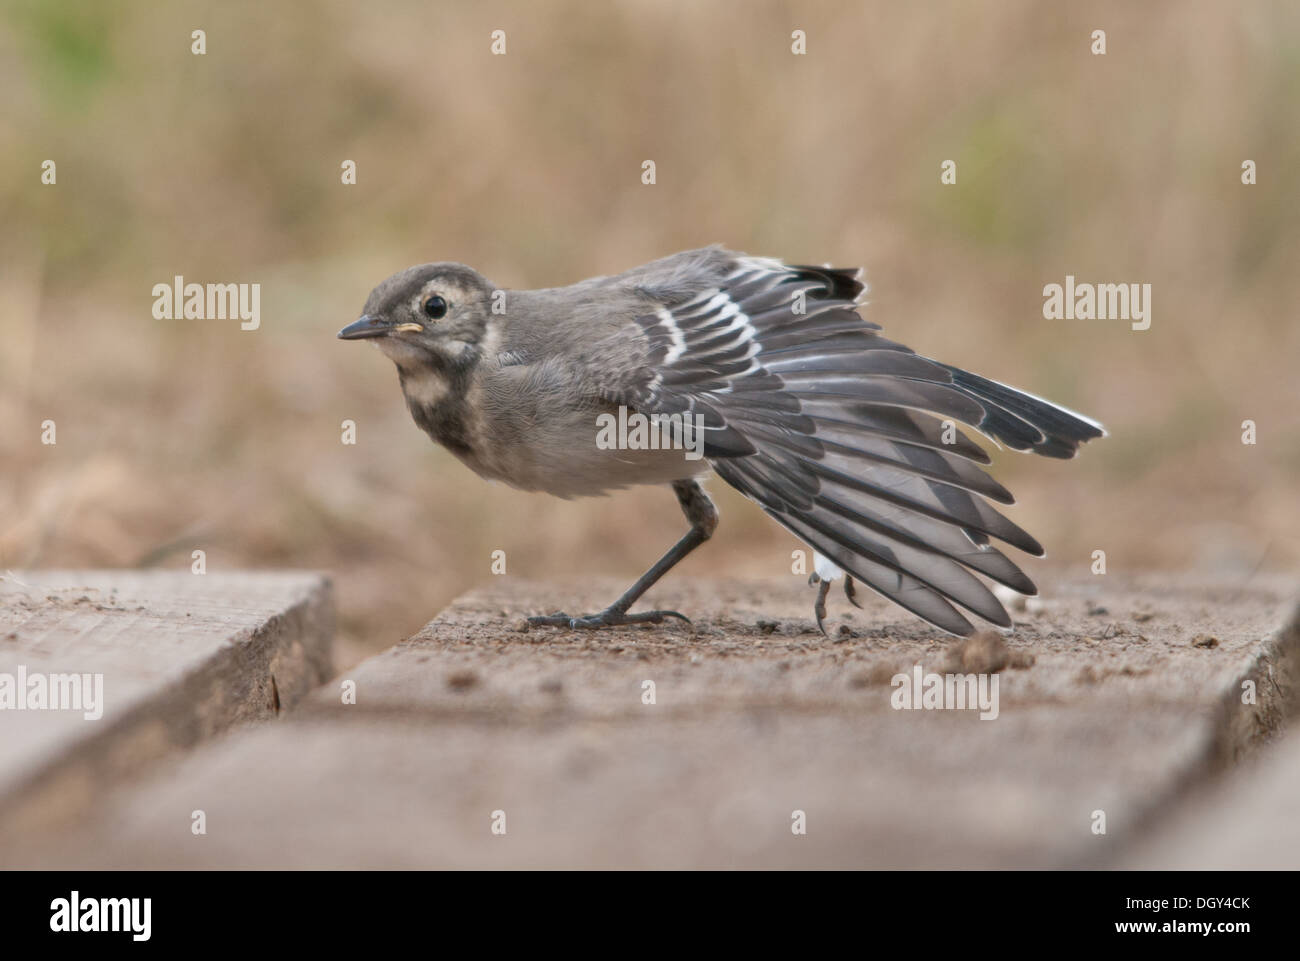 Pied wagtail stretching its wing Stock Photo